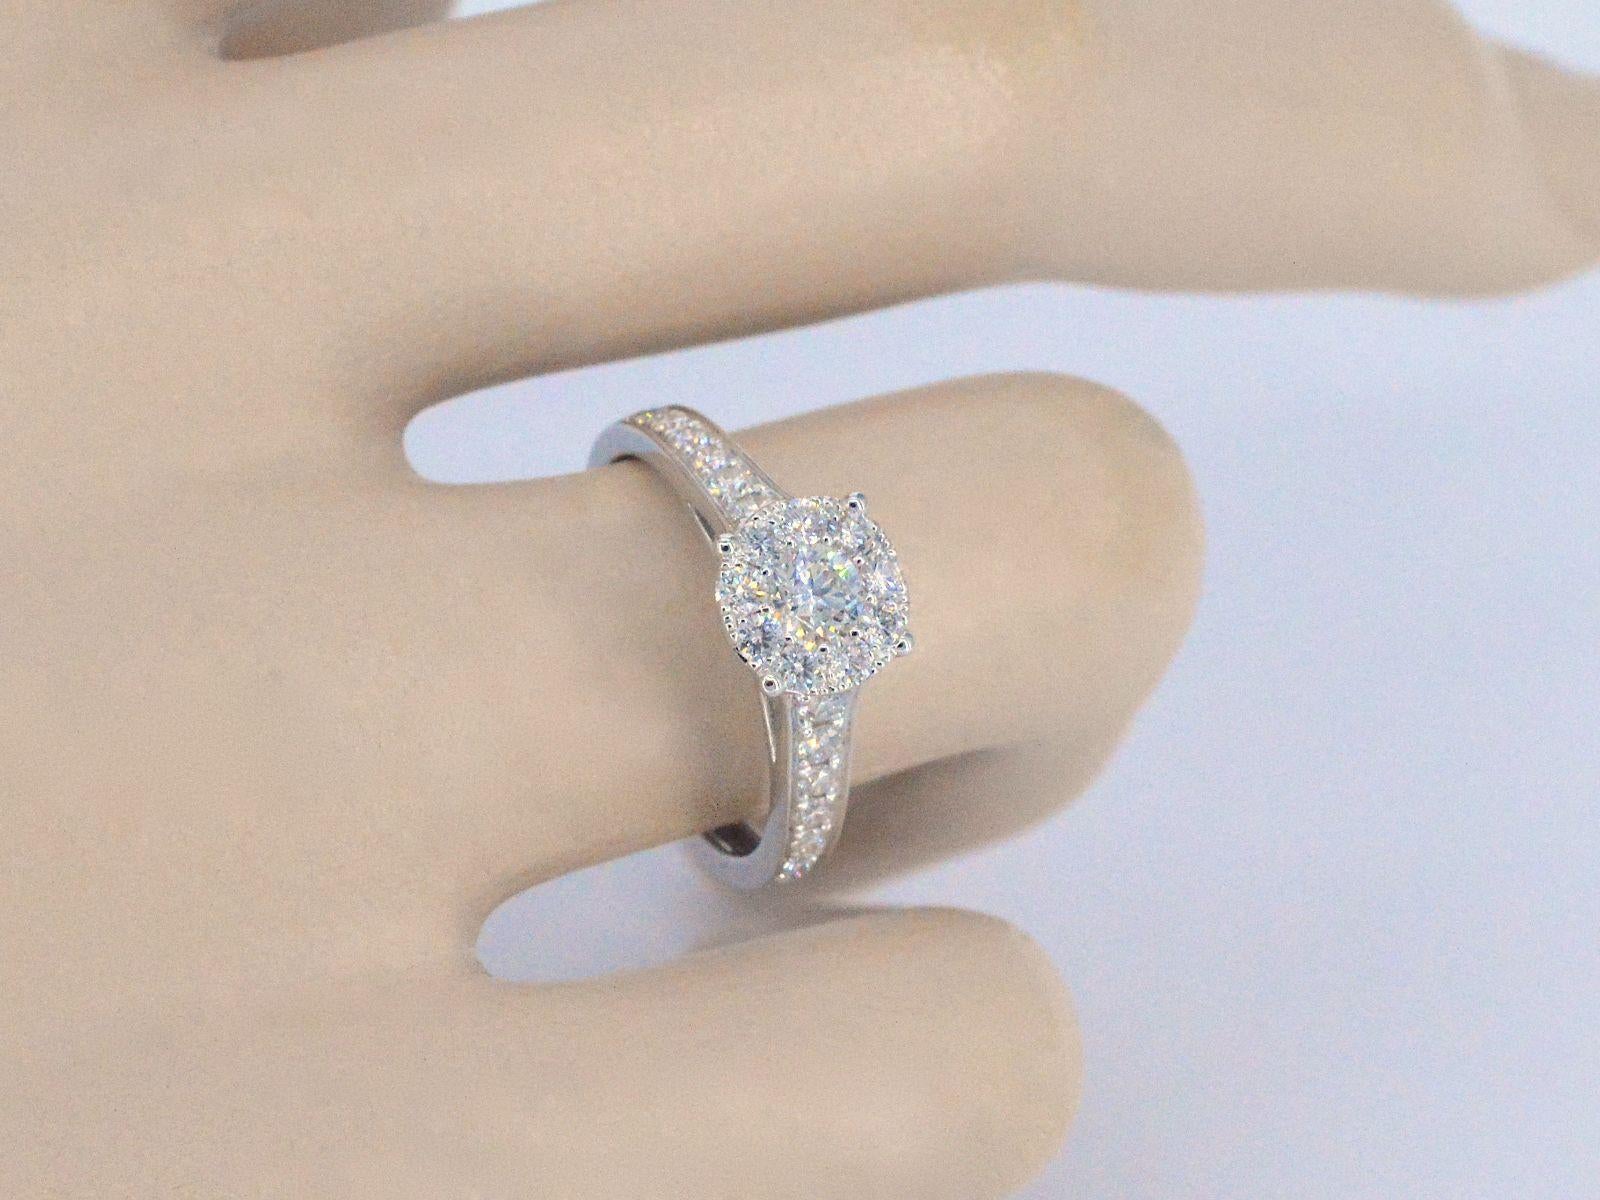 A high-quality white gold entourage ring with brilliant cut diamonds of 1.00 carat is a luxurious piece of jewelry that features a stunning central diamond surrounded by smaller diamonds. The ring is made of high-quality white gold, which adds to